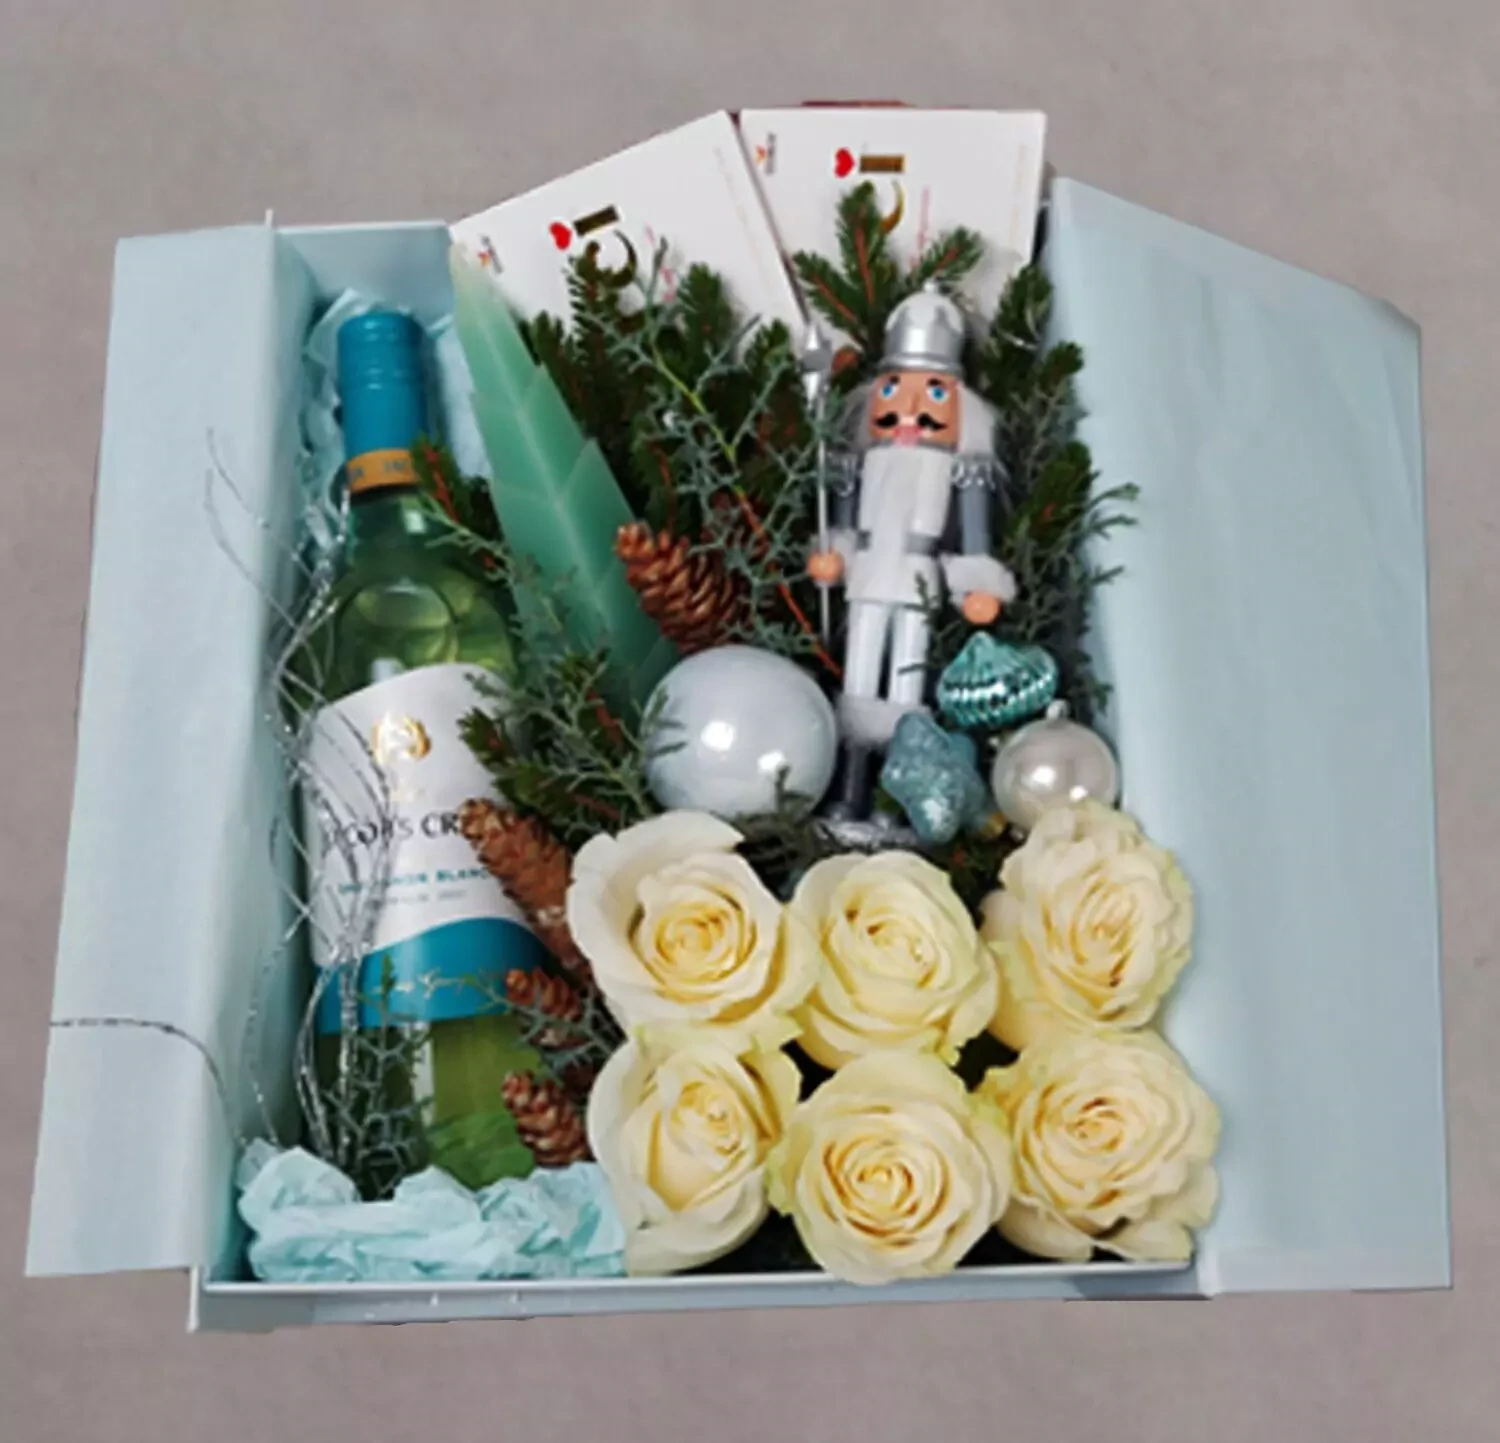 Box with roses and gifts